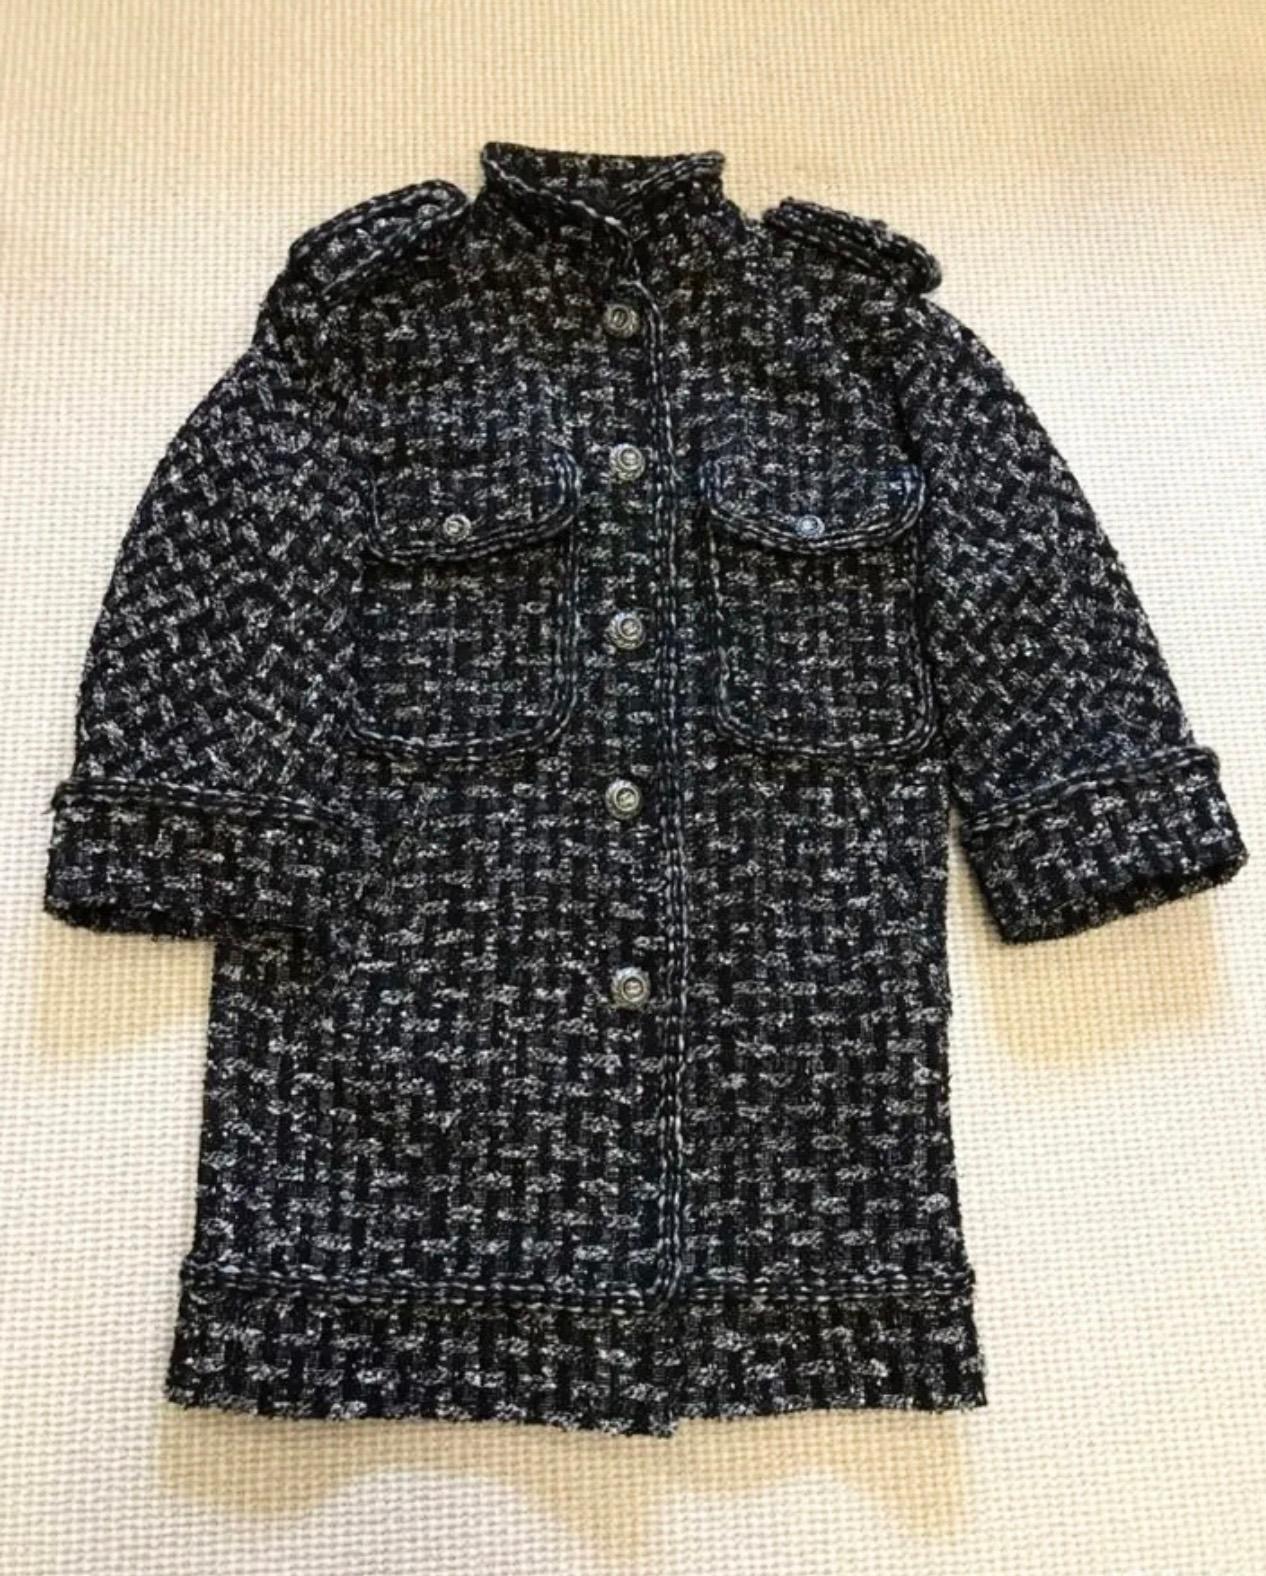 Chanel CC Buttons Oversized Black Tweed Jacket / Coat In Excellent Condition For Sale In Dubai, AE